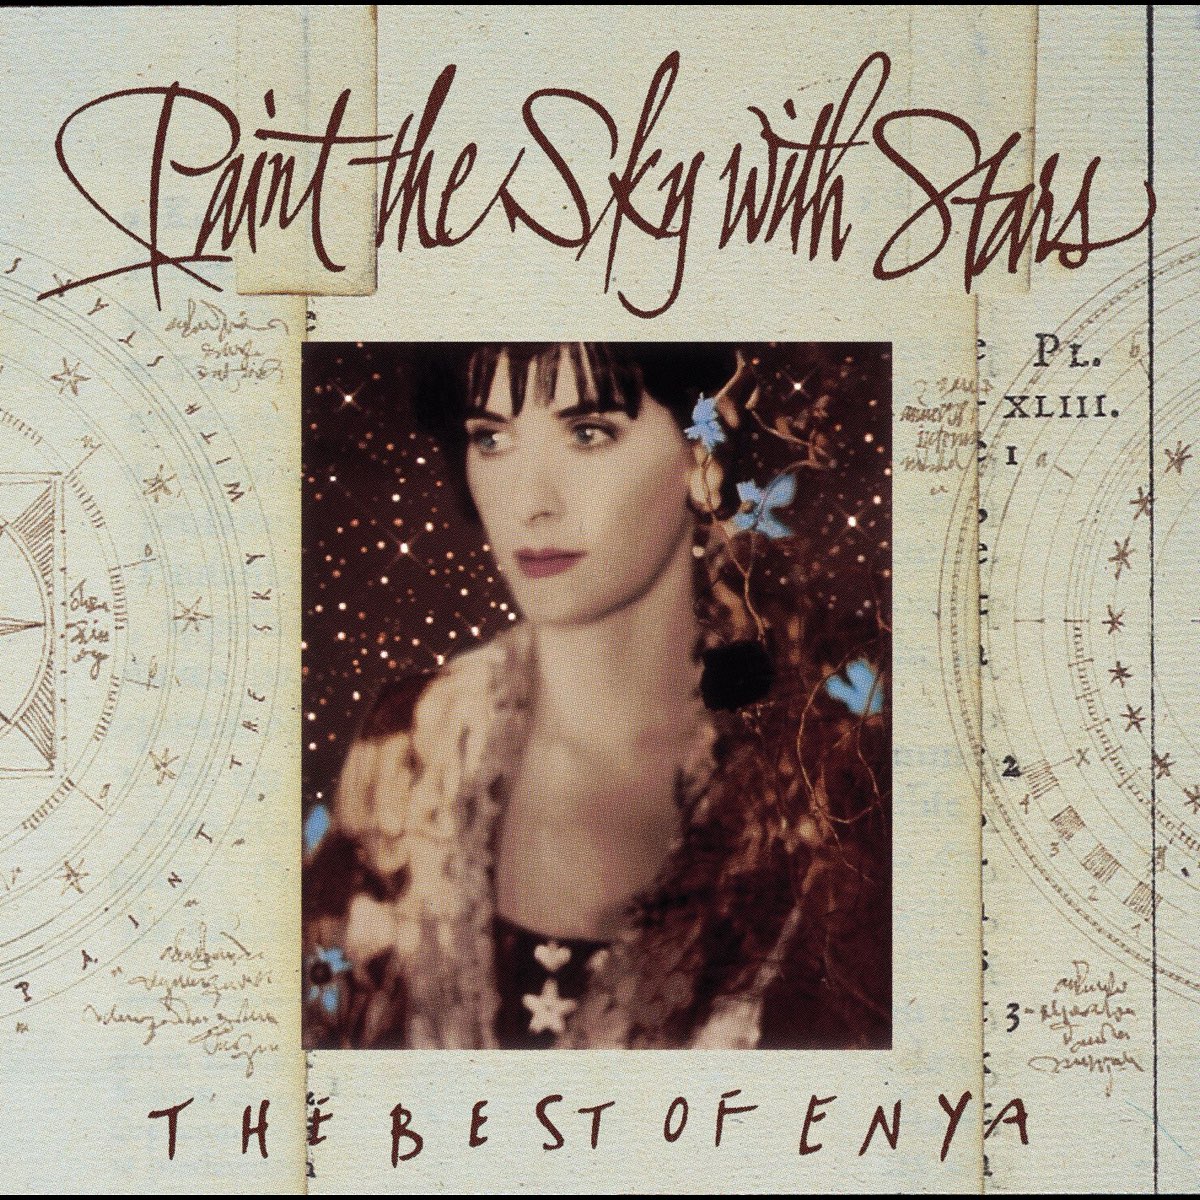 ‎Paint the Sky With Stars - The Best of Enya - Album by Enya - Apple Music